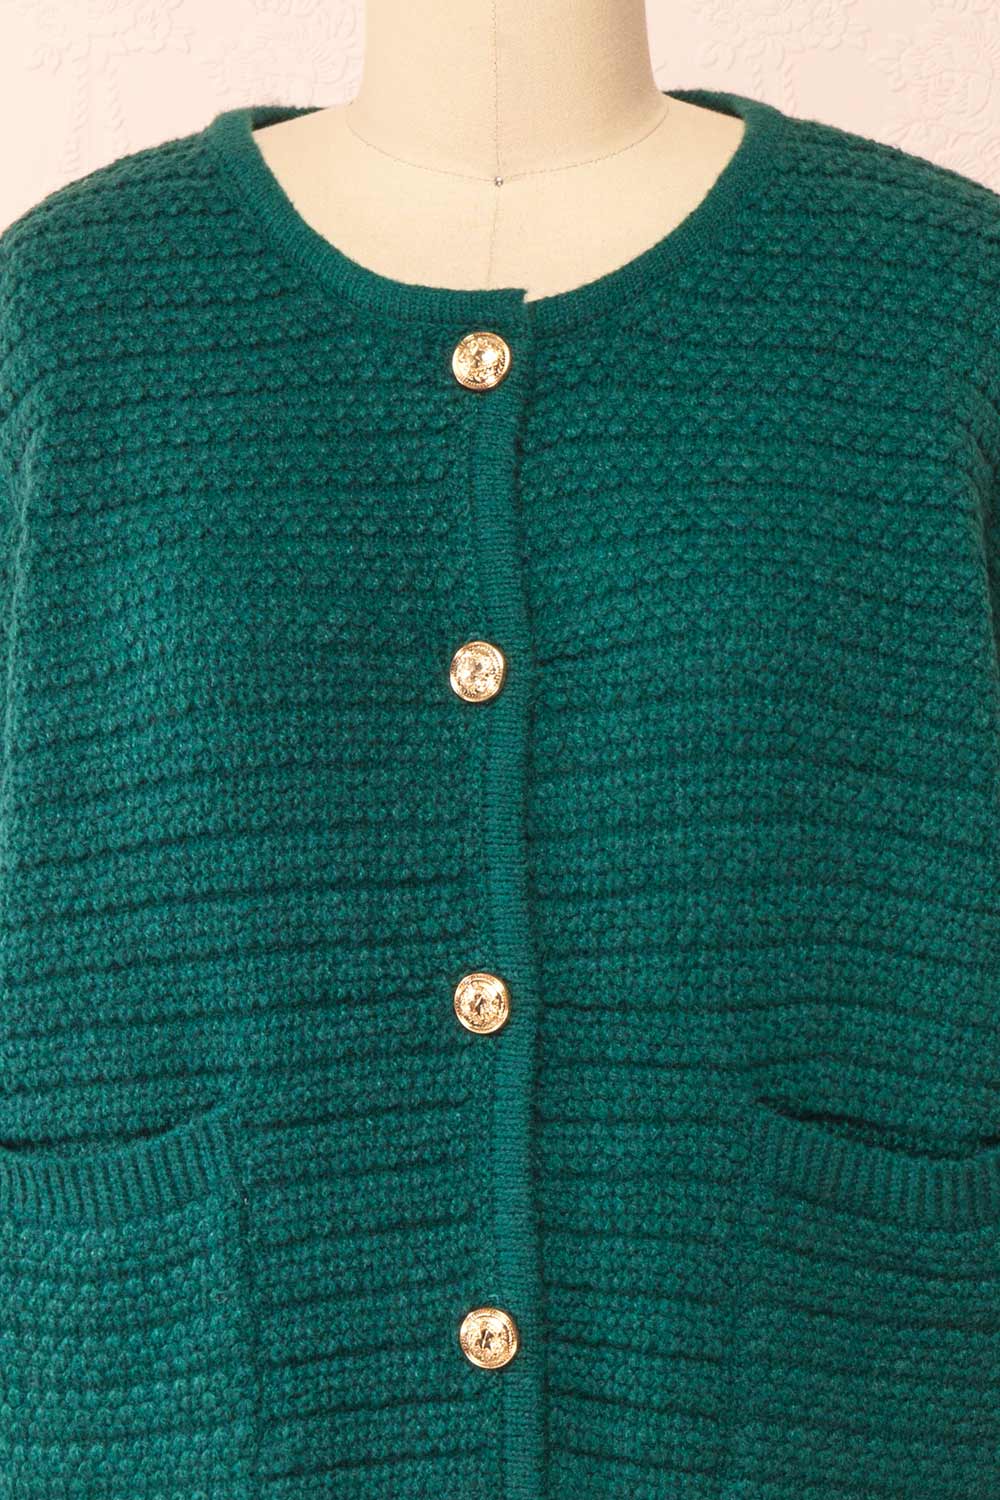 Suzie Green Oversized Knit Cardigan | Boutique 1861 front close-up